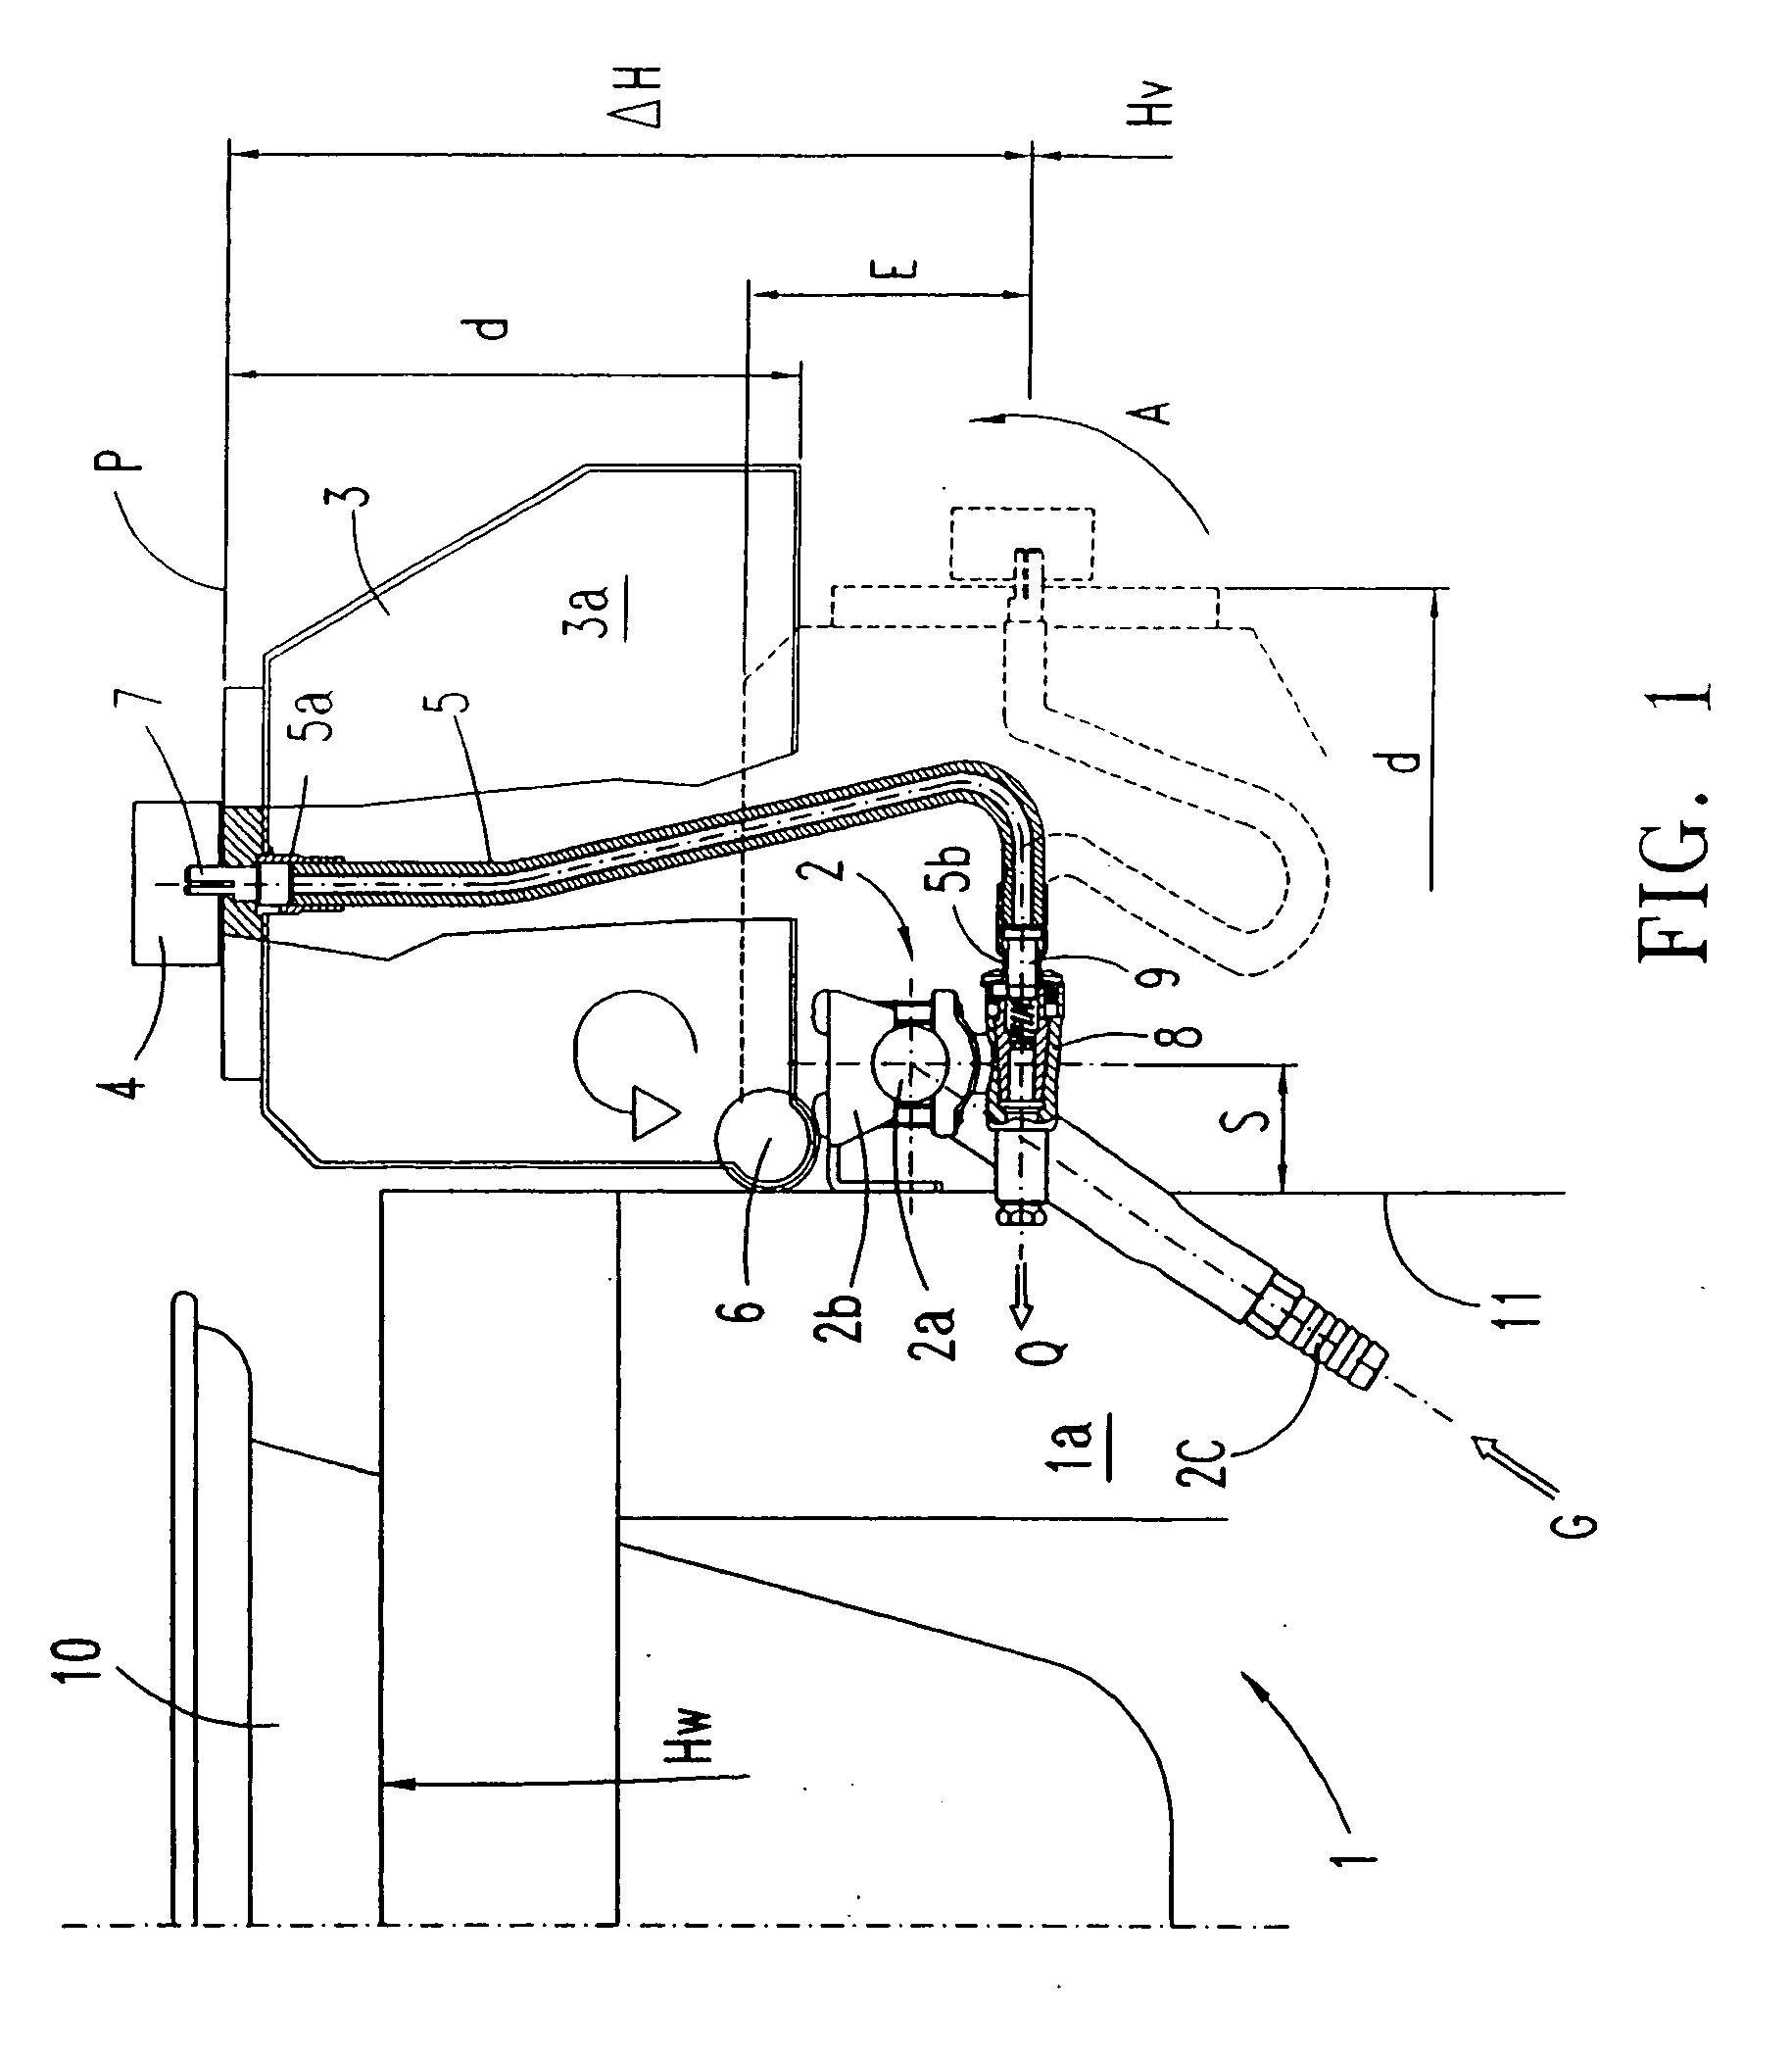 Gas cooker appliance with an orientable control panel